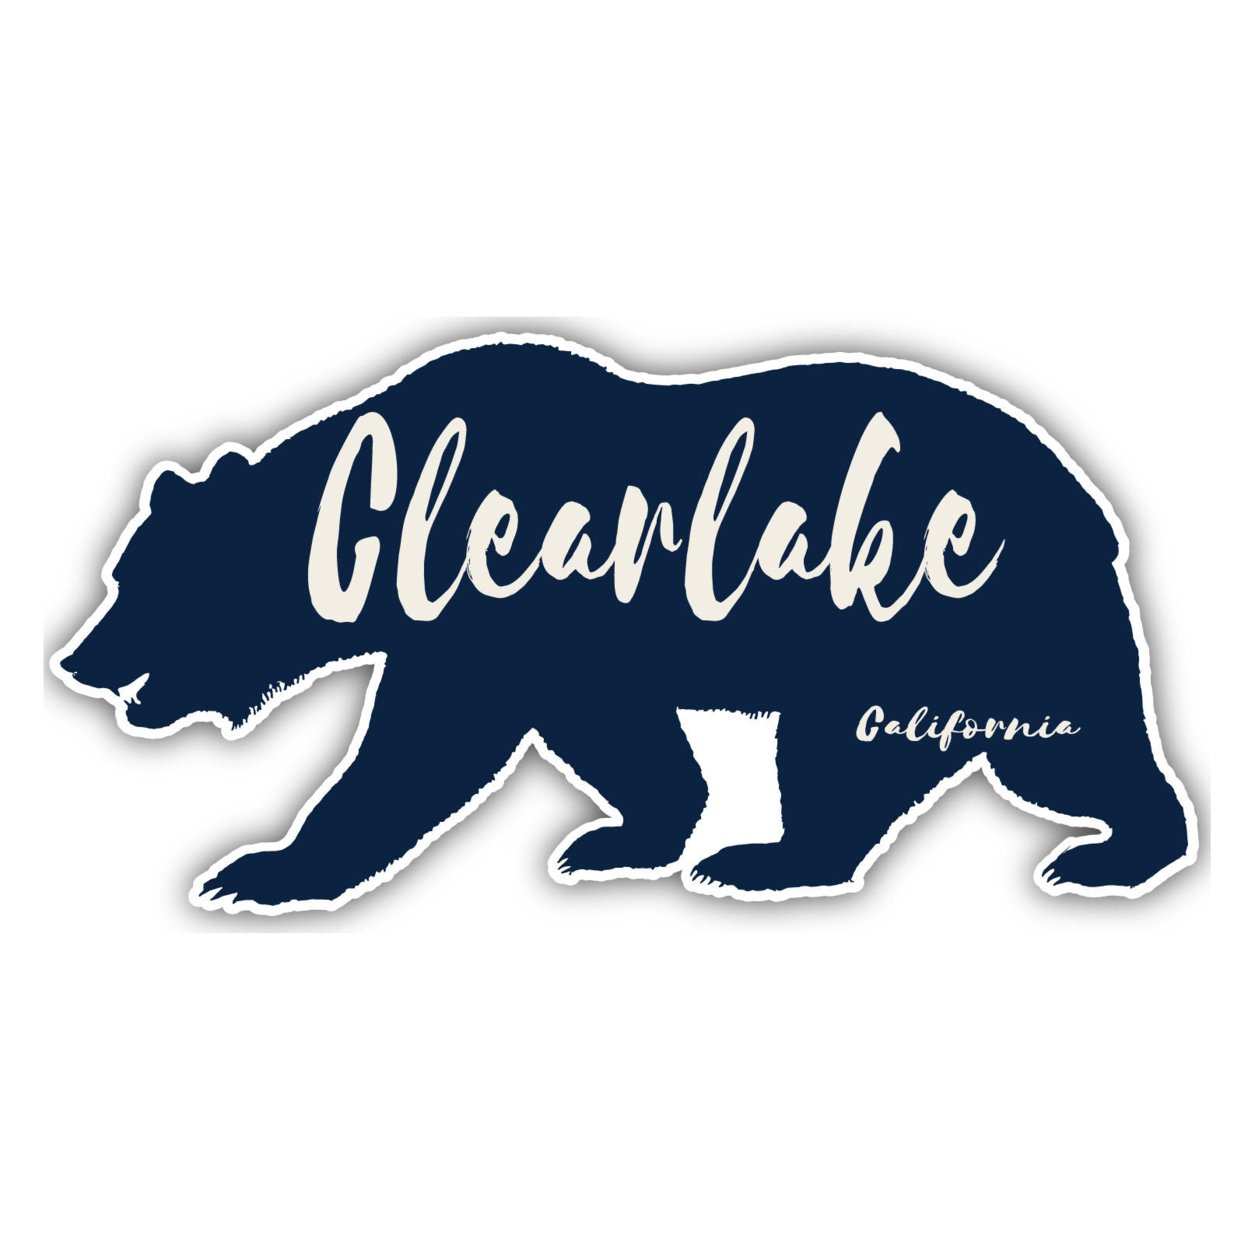 Clearlake California Souvenir Decorative Stickers (Choose Theme And Size) - 4-Pack, 6-Inch, Tent